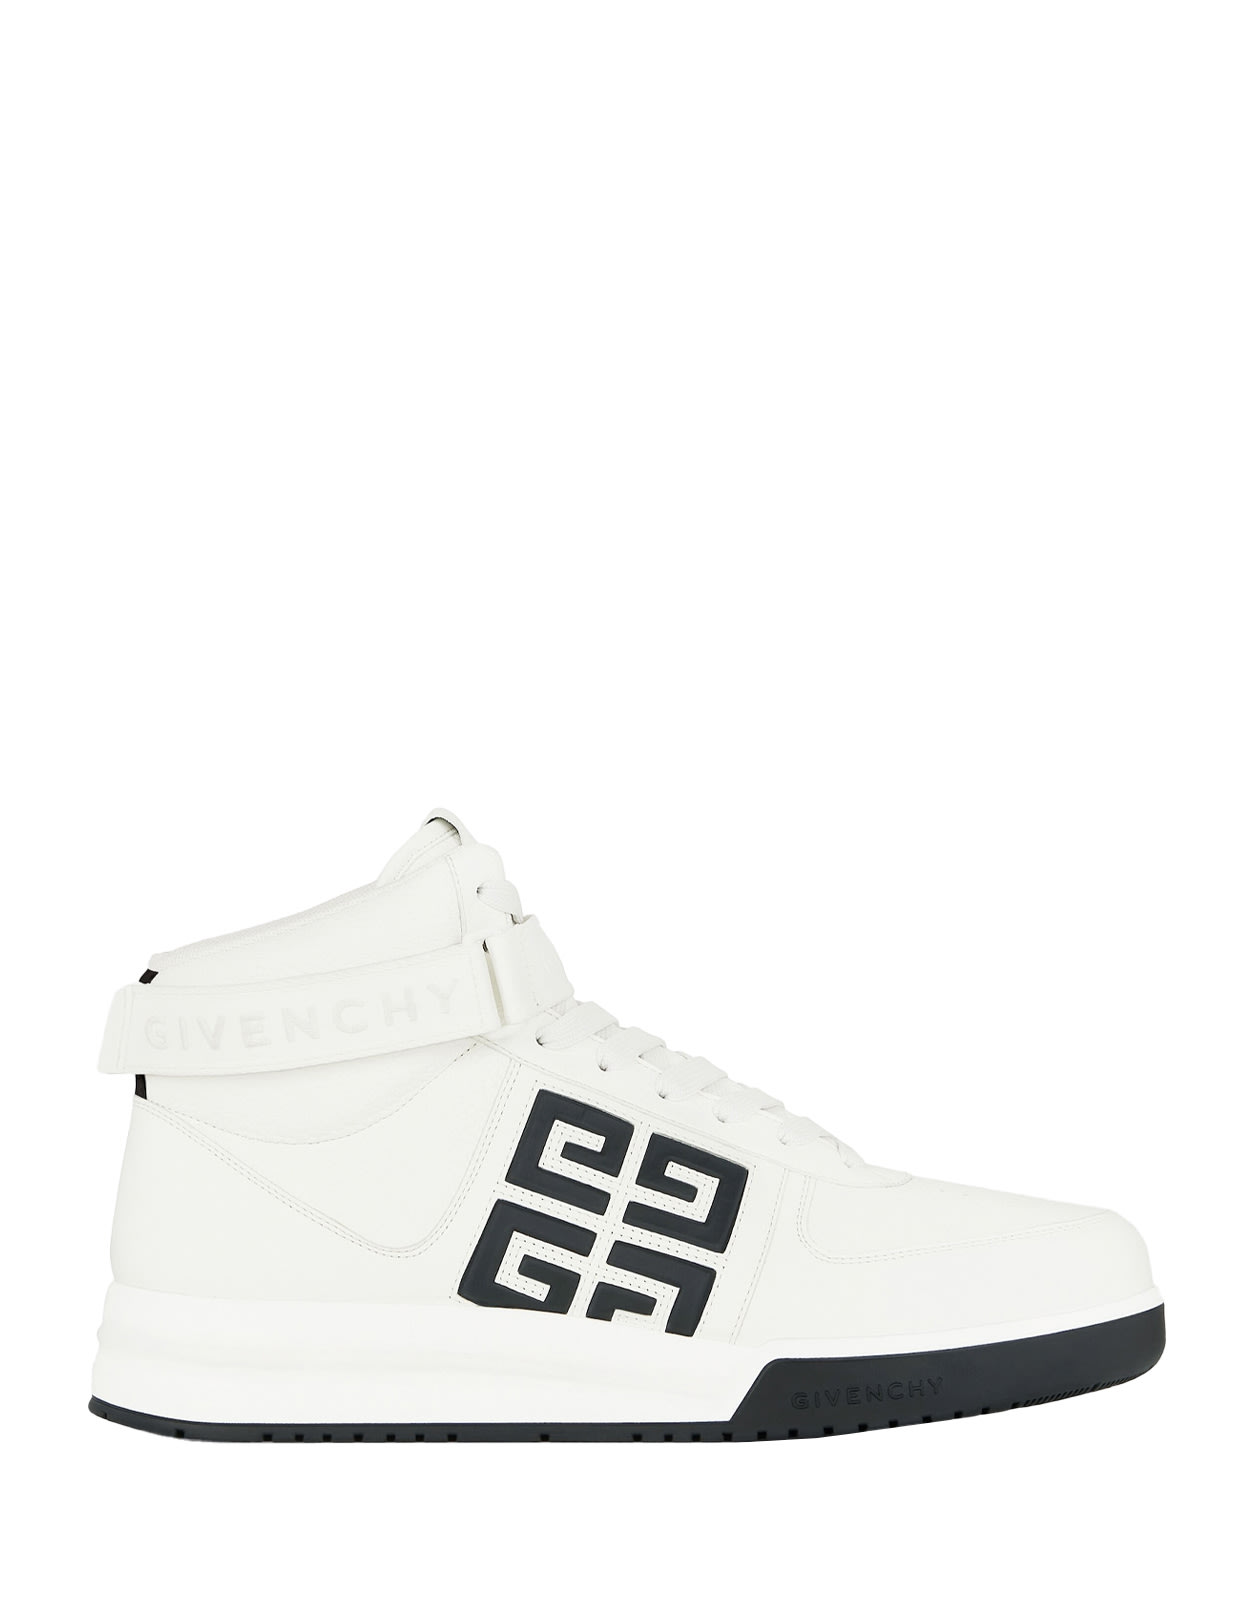 GIVENCHY G4 HIGH SNEAKERS IN WHITE LEATHER